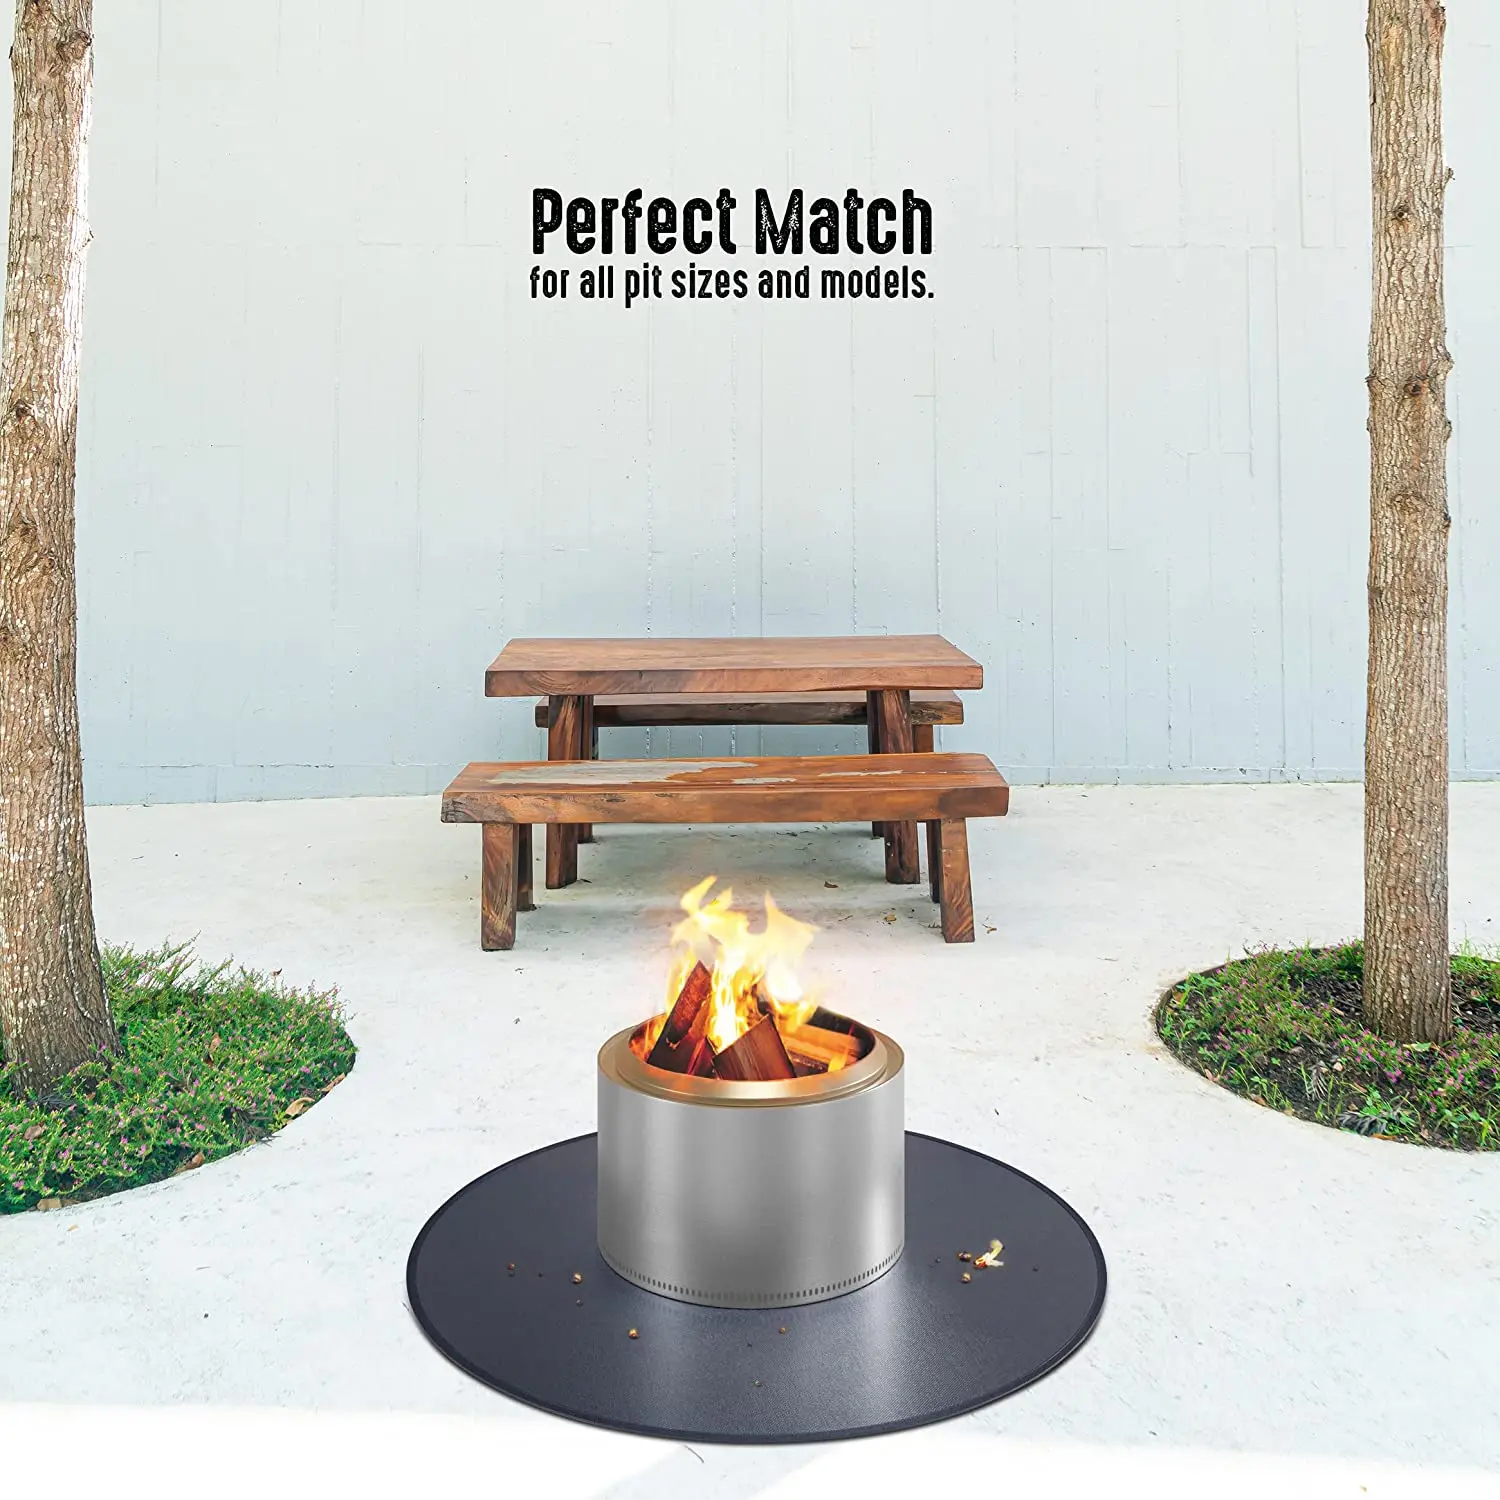 BSCI audited factory high temperature resistant outdoor fire pit mat for protecting patio deck